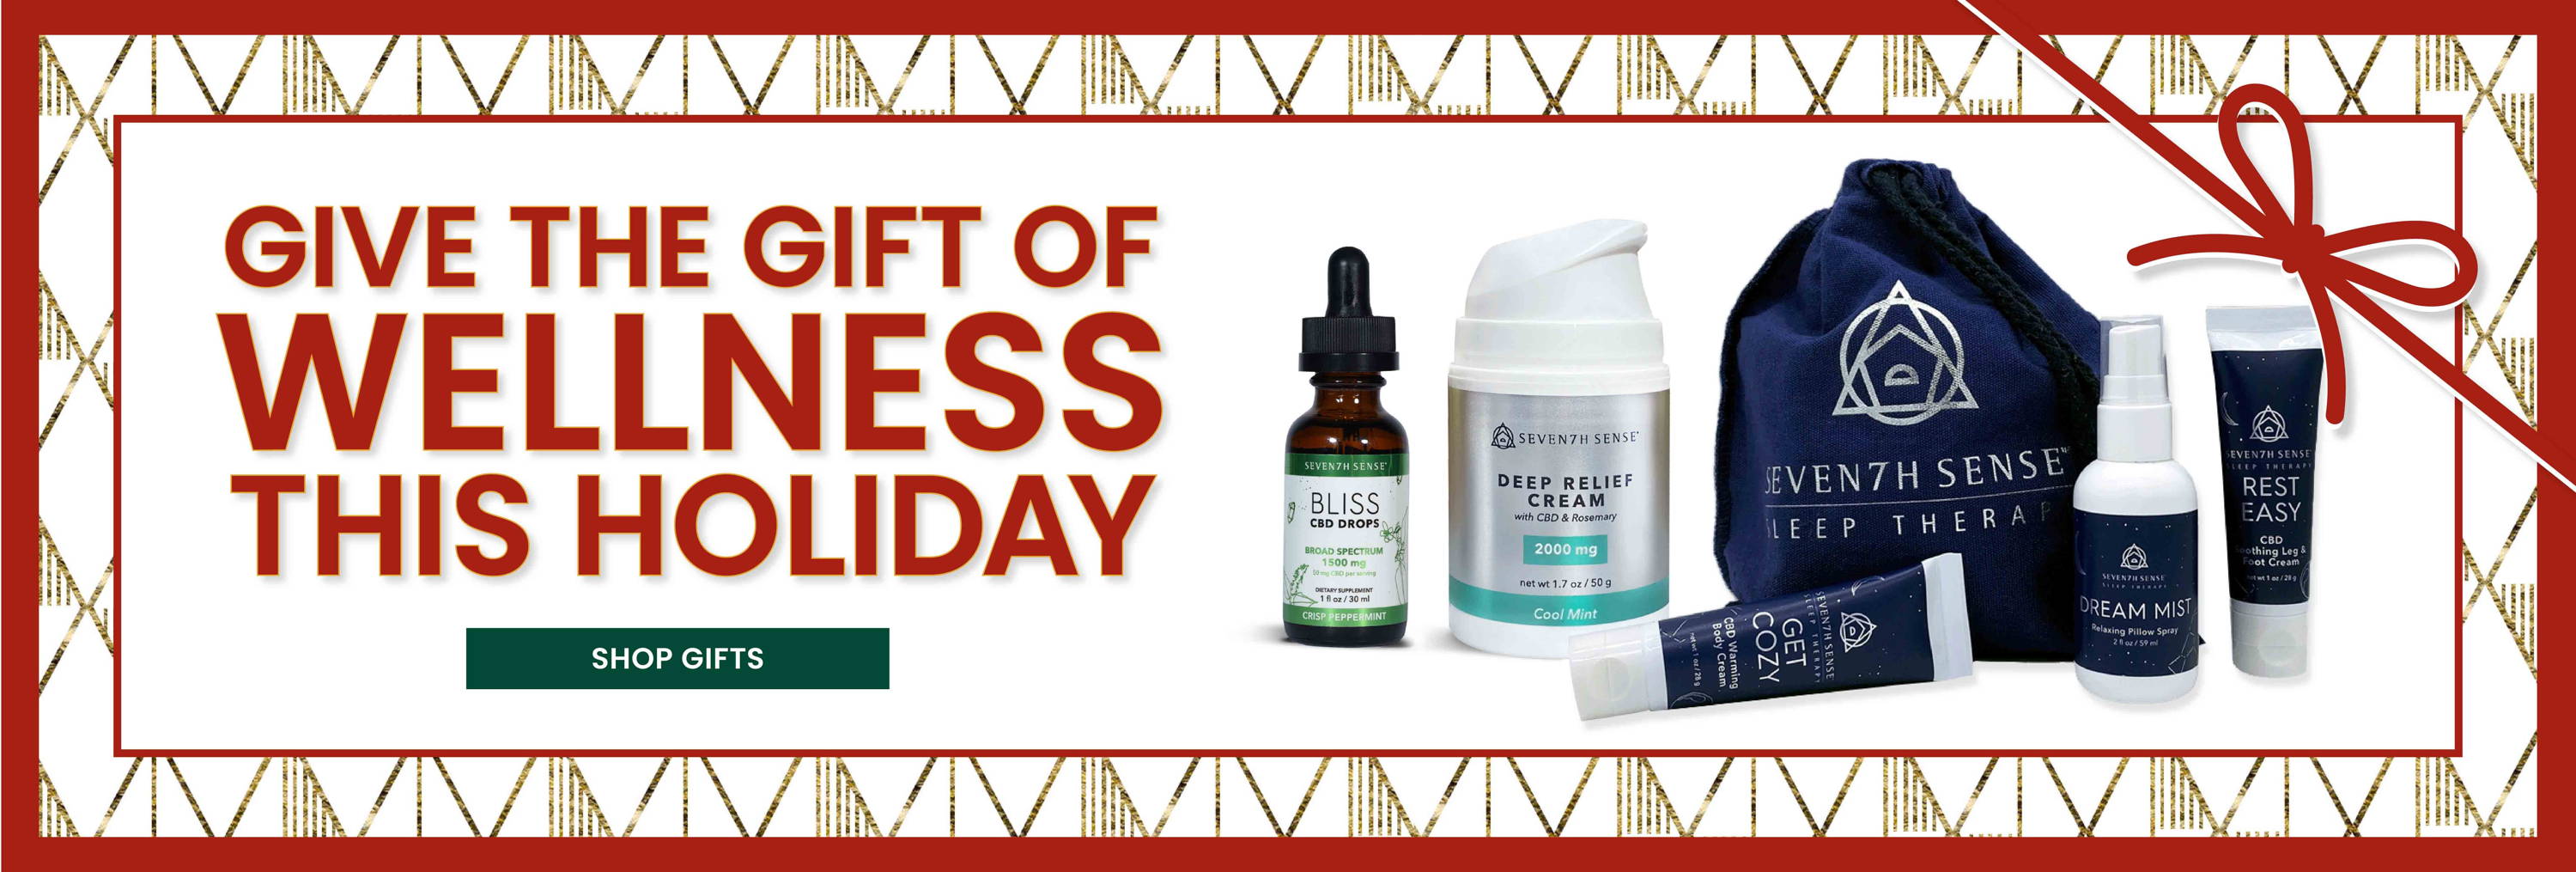 Give the Gift of Wellness this Holiday